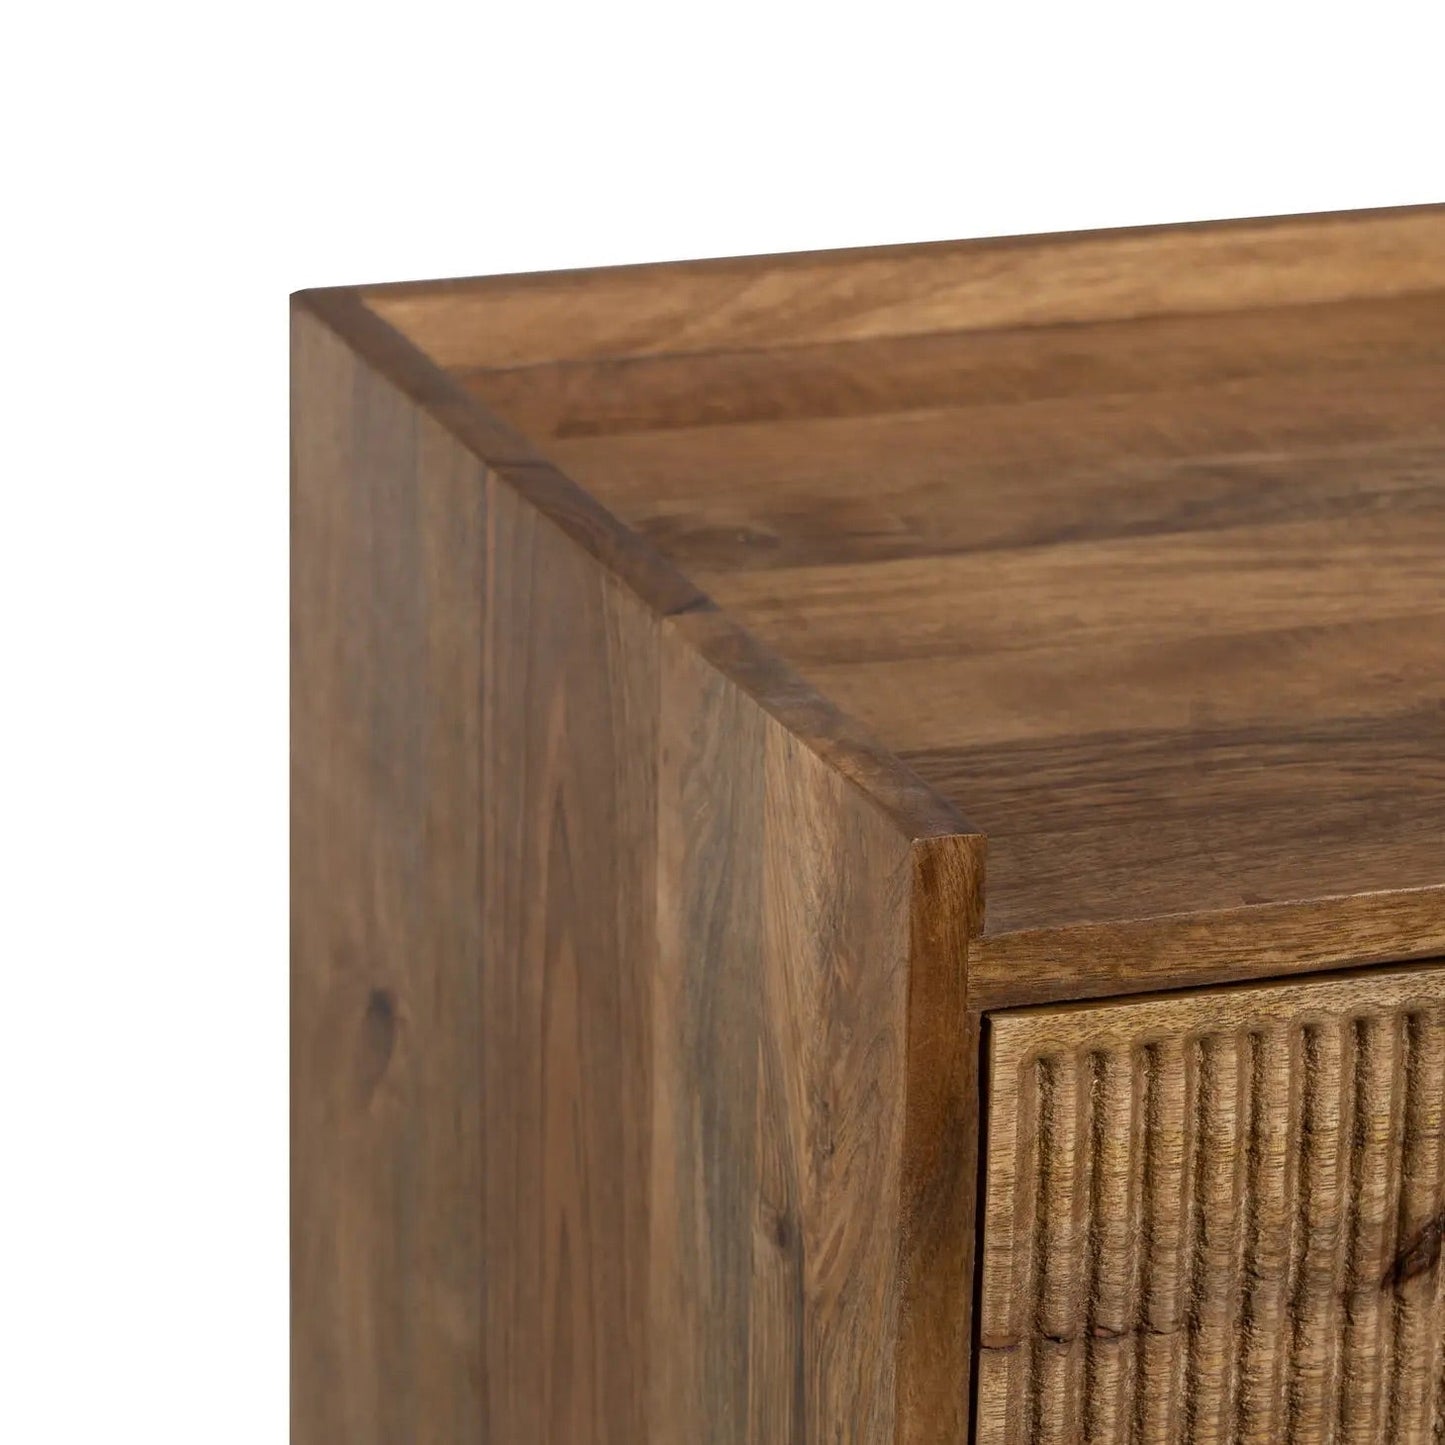 Moore Natural Mango Wood Nightstand with 2 Storage Drawers, Line Textured Pattern, European Style